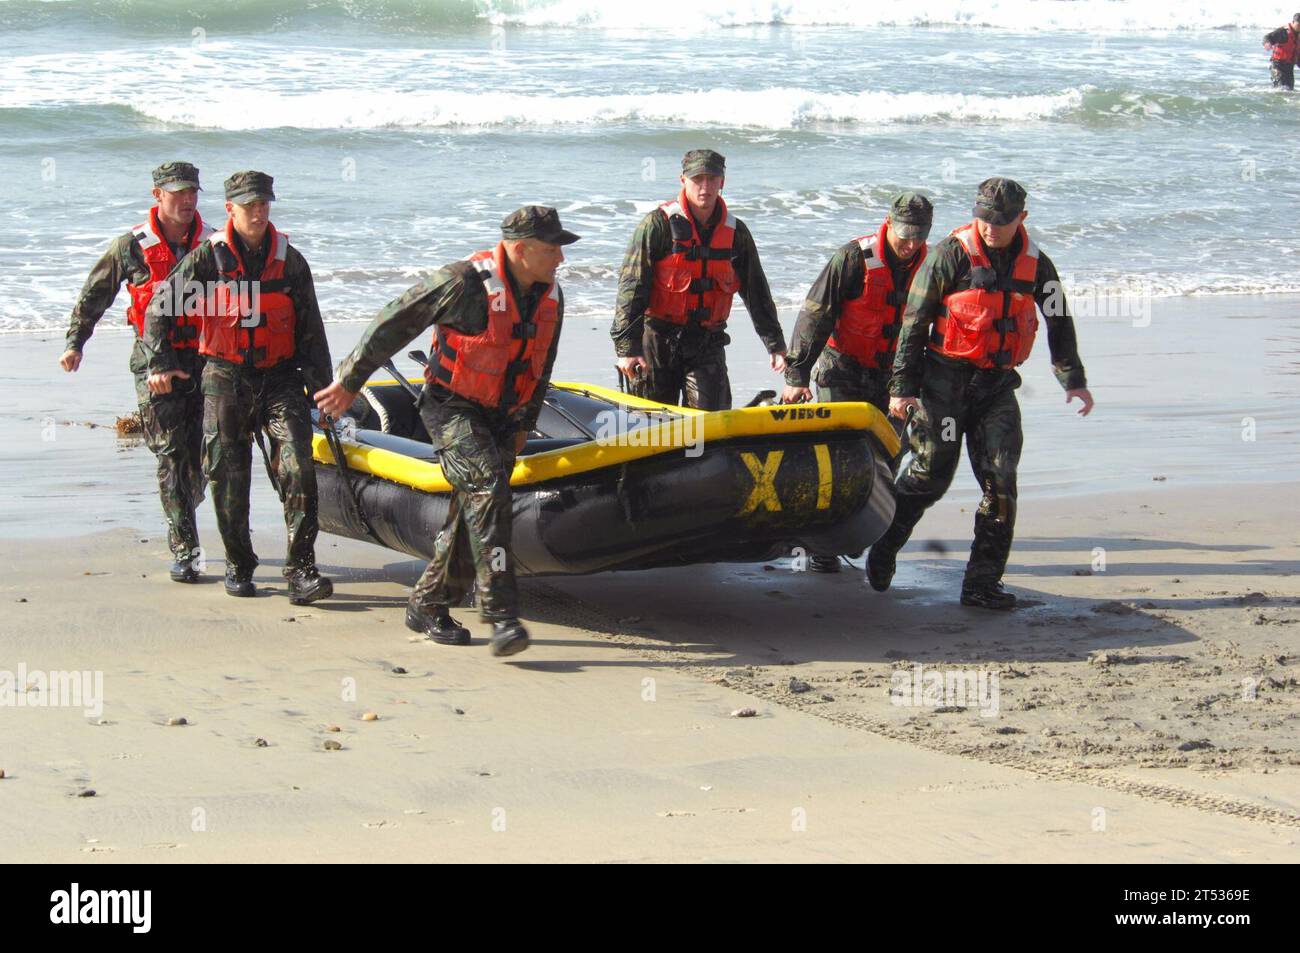 0801162738S-024  CORONADO, Calif. (Jan 16, 2008) Basic Underwater Demolition/SEAL students bring their boat out from the water after a surf passage exercise. These students are just starting the yearlong process to become Navy SEALs. U.S. Navy Stock Photo